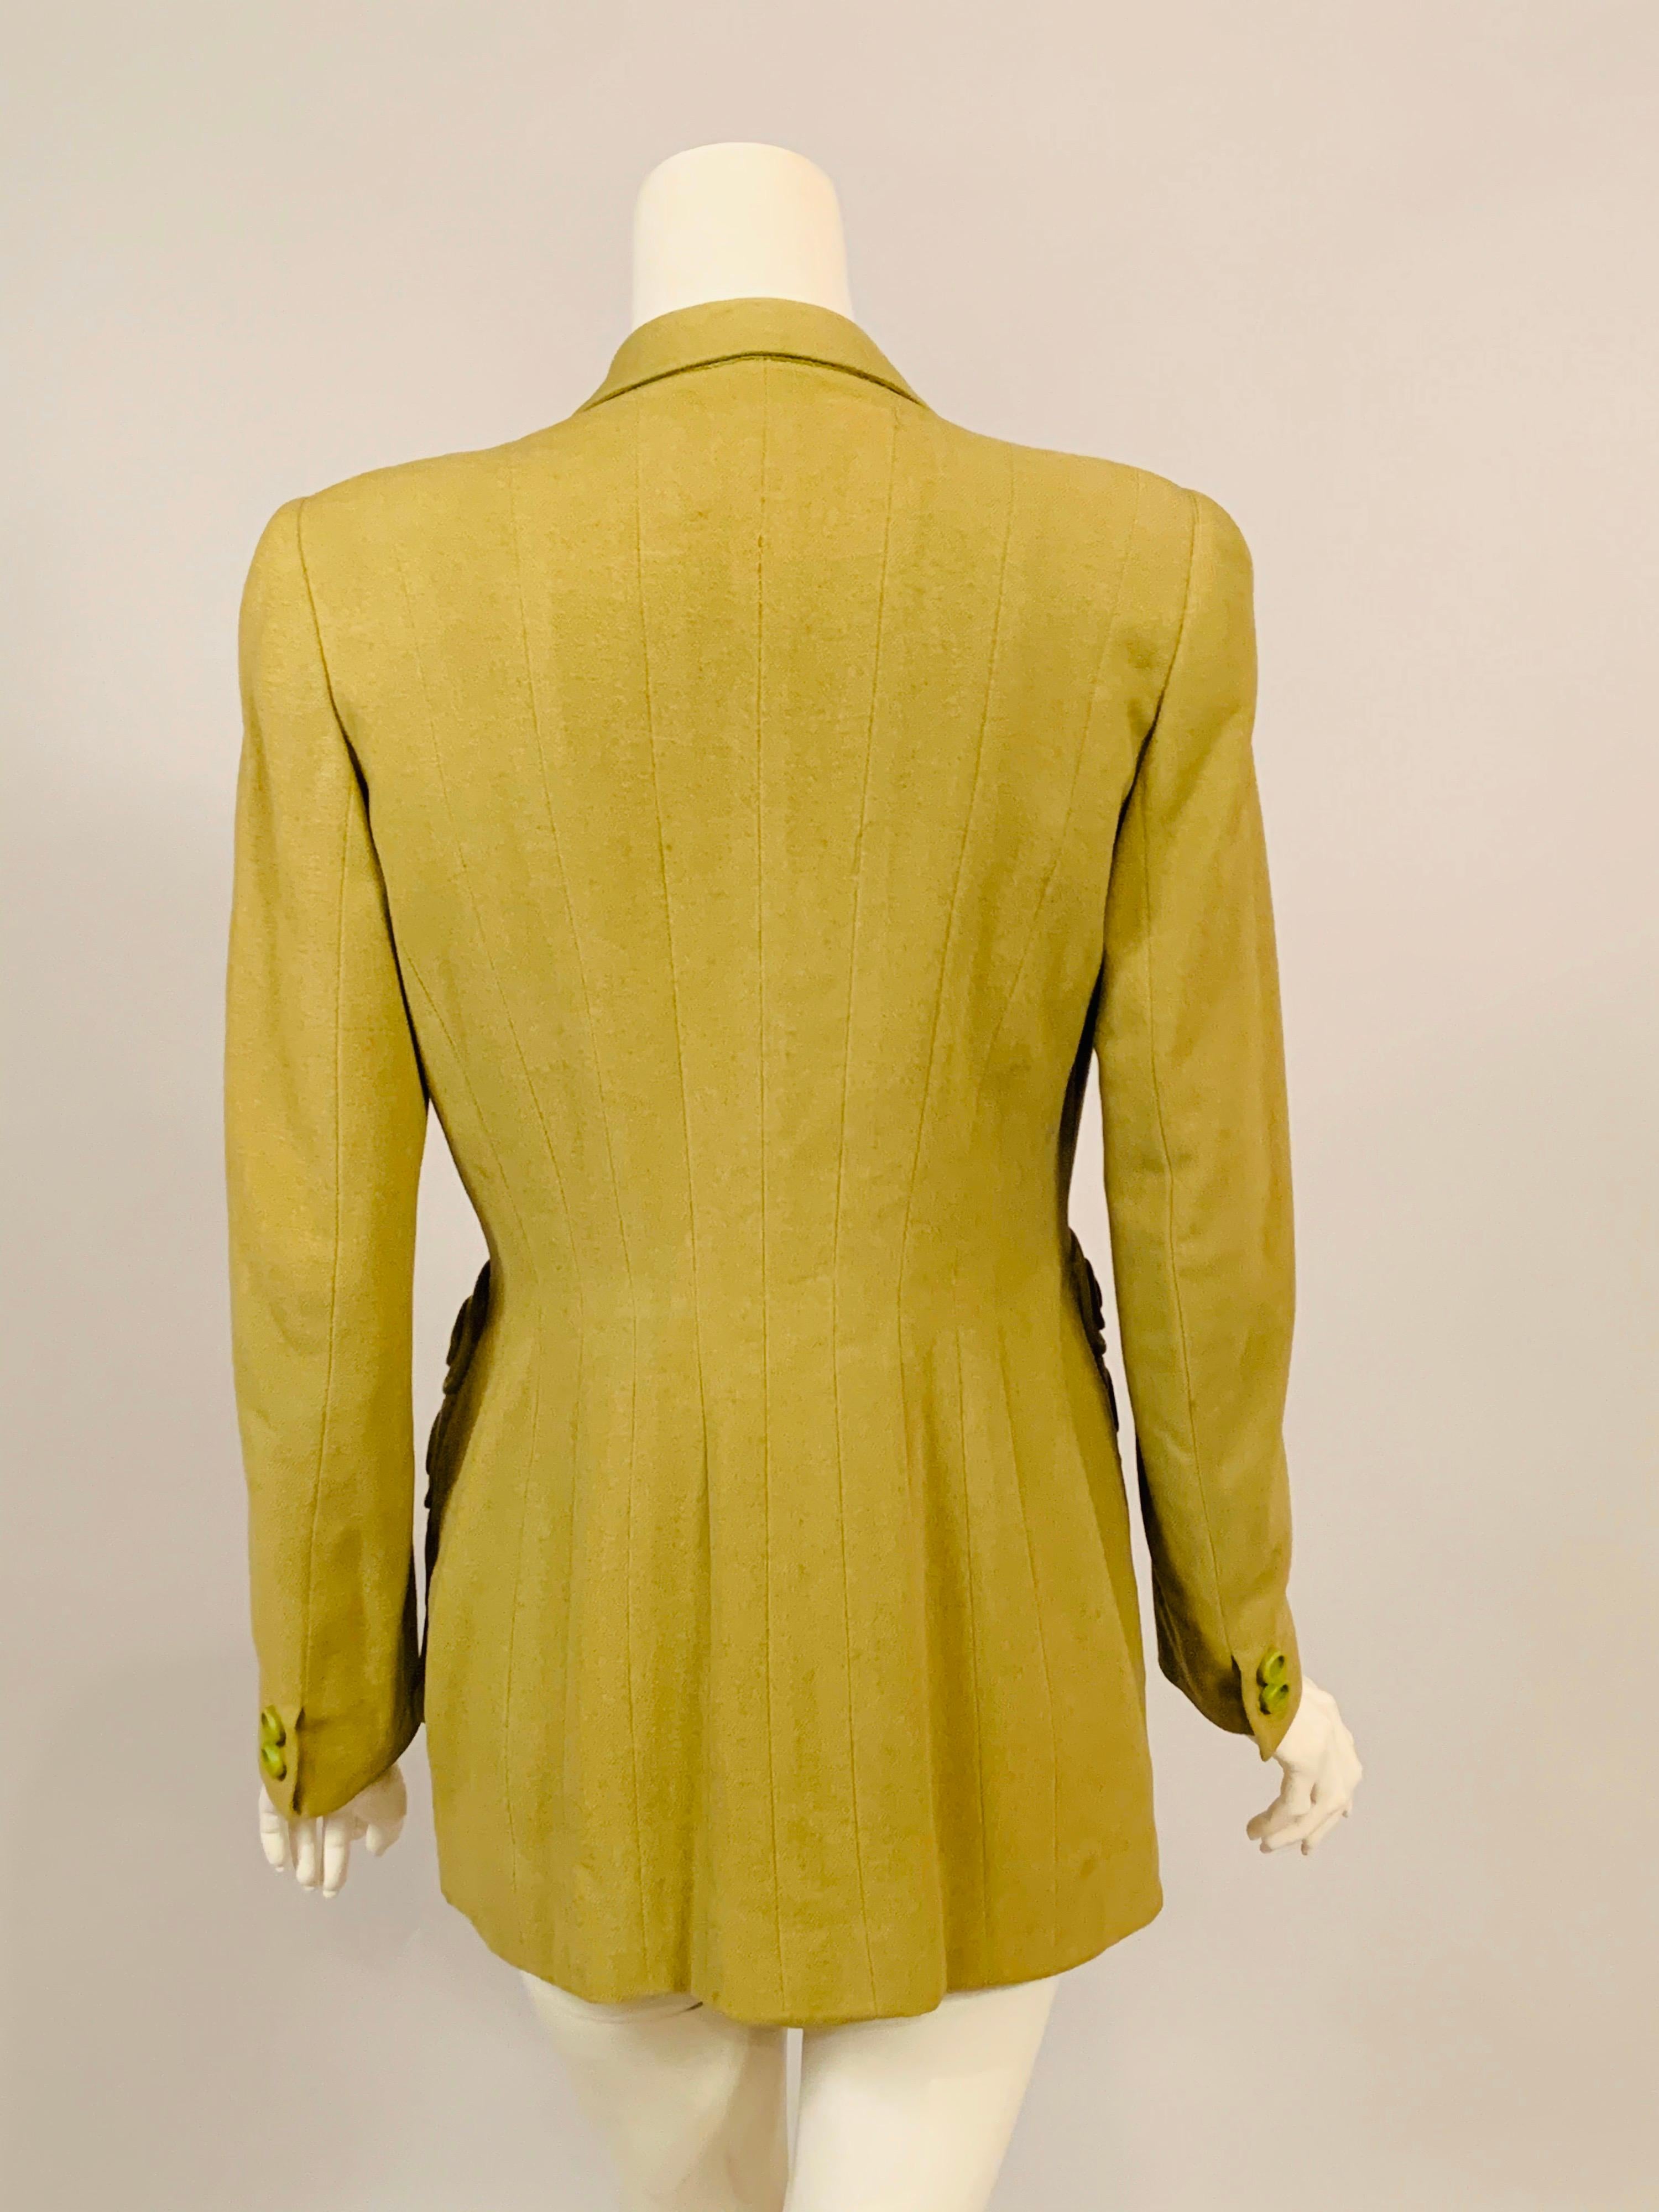 Lanvin Haute Couture May 1944 Spring Green Wool Jacket for Collector or Designer 1